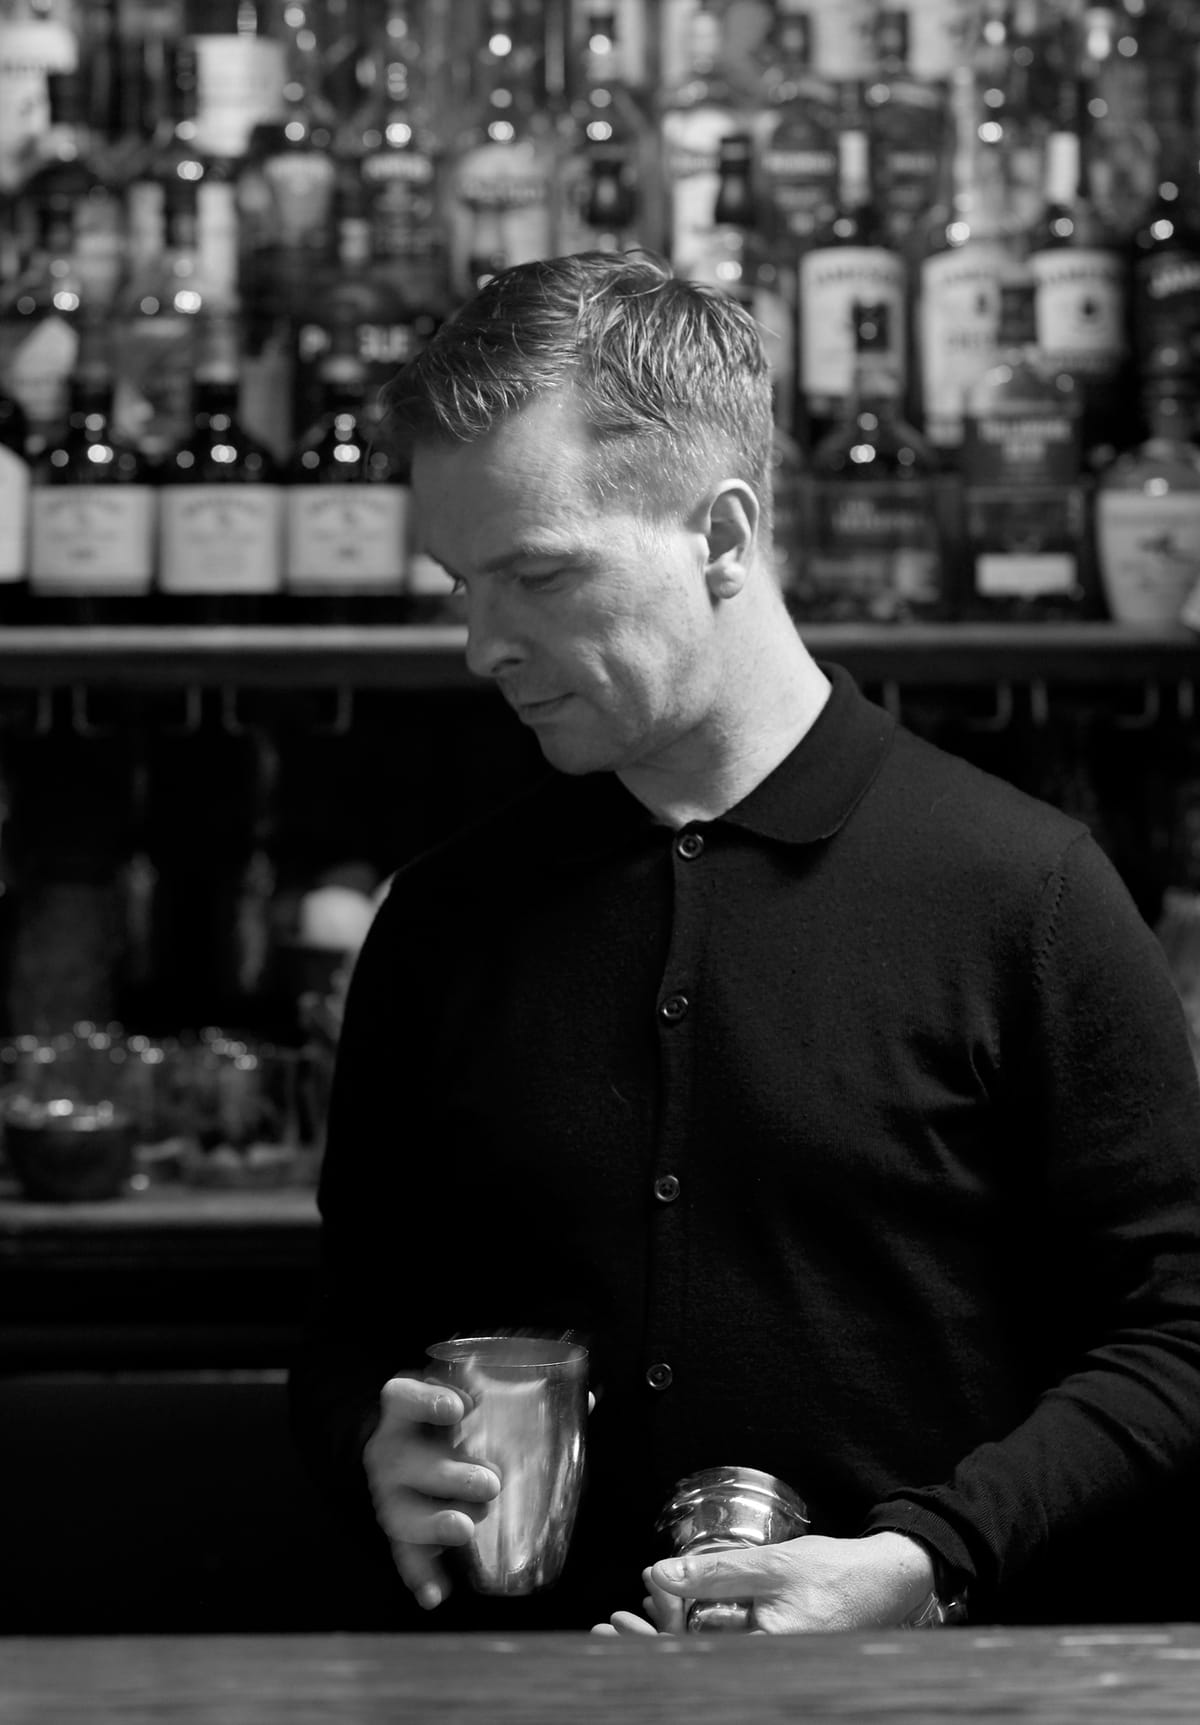 Mike Enright on what he’s learned in 10 years of gin at The Barber Shop